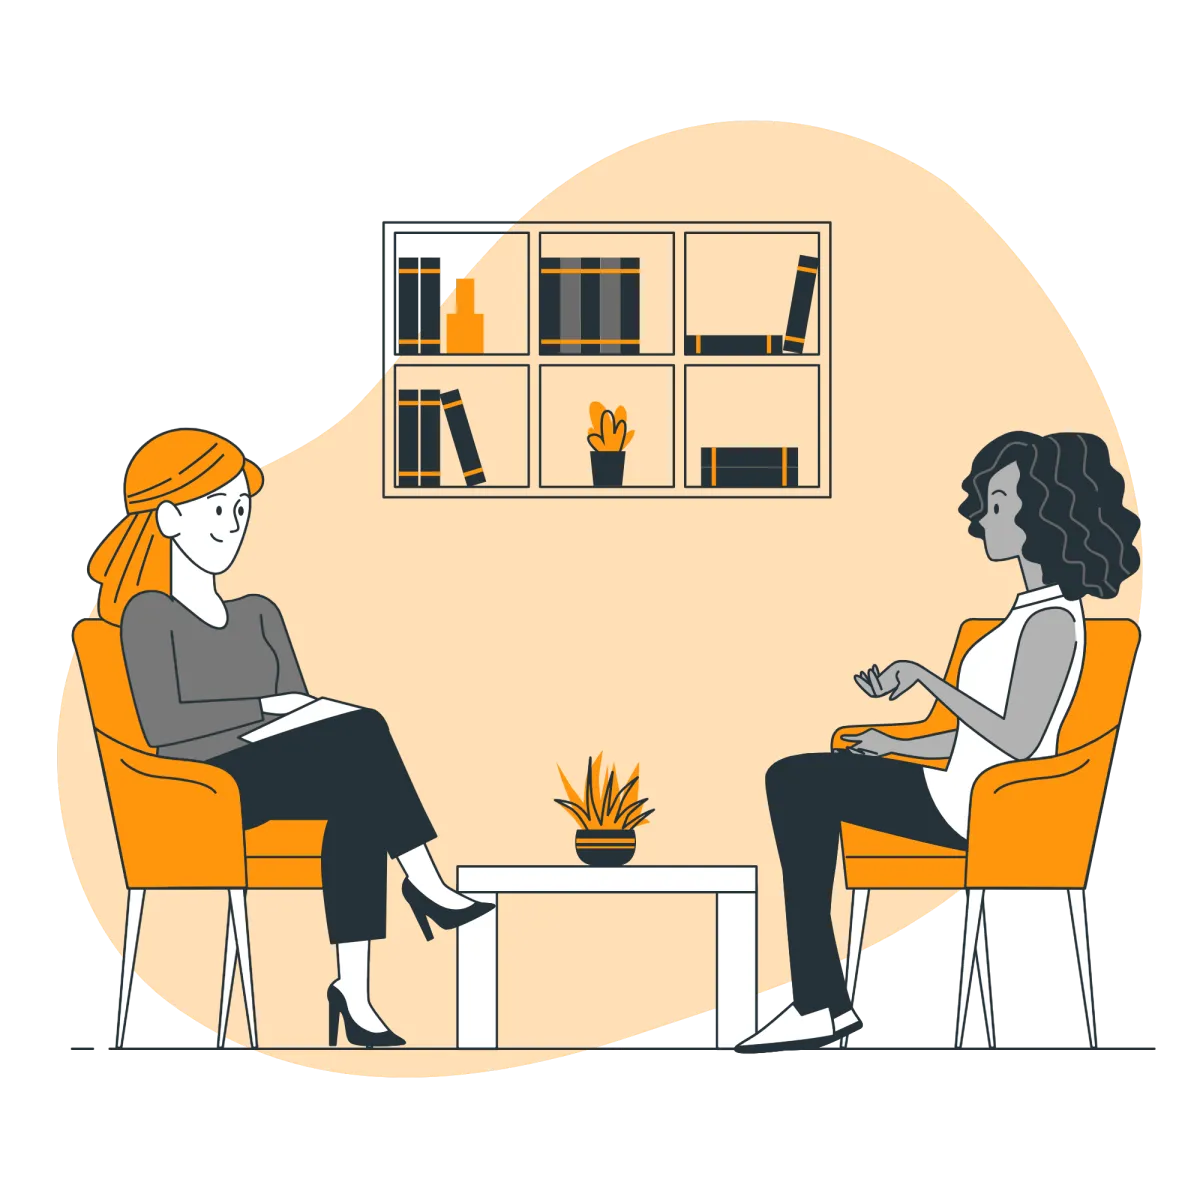 Graphic of two people sitting in armchairs chatting